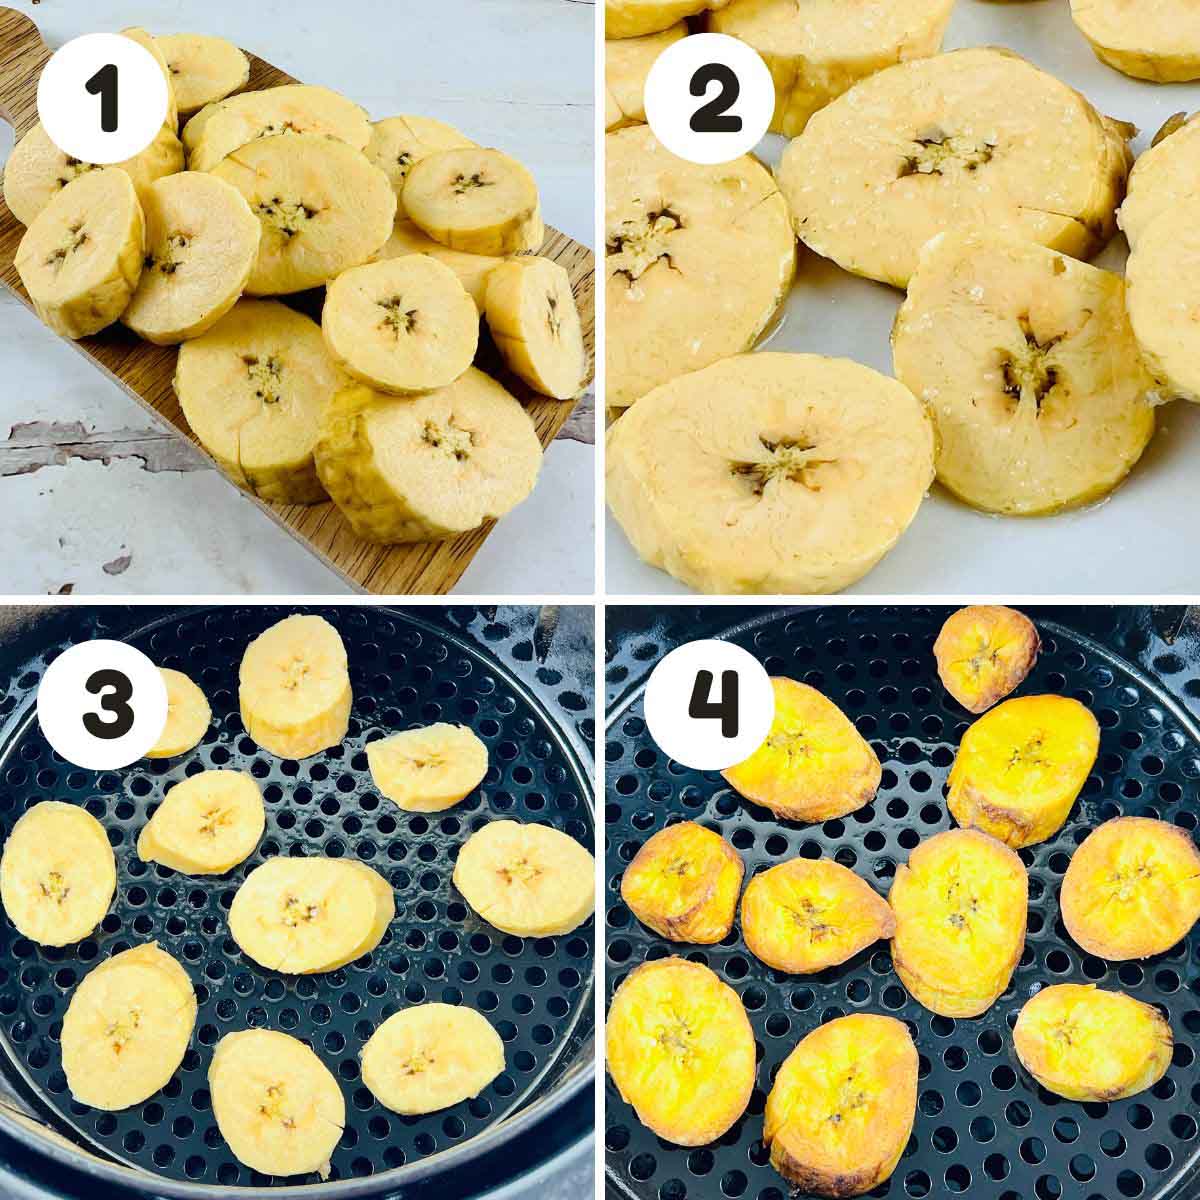 Steps to make the plantains.